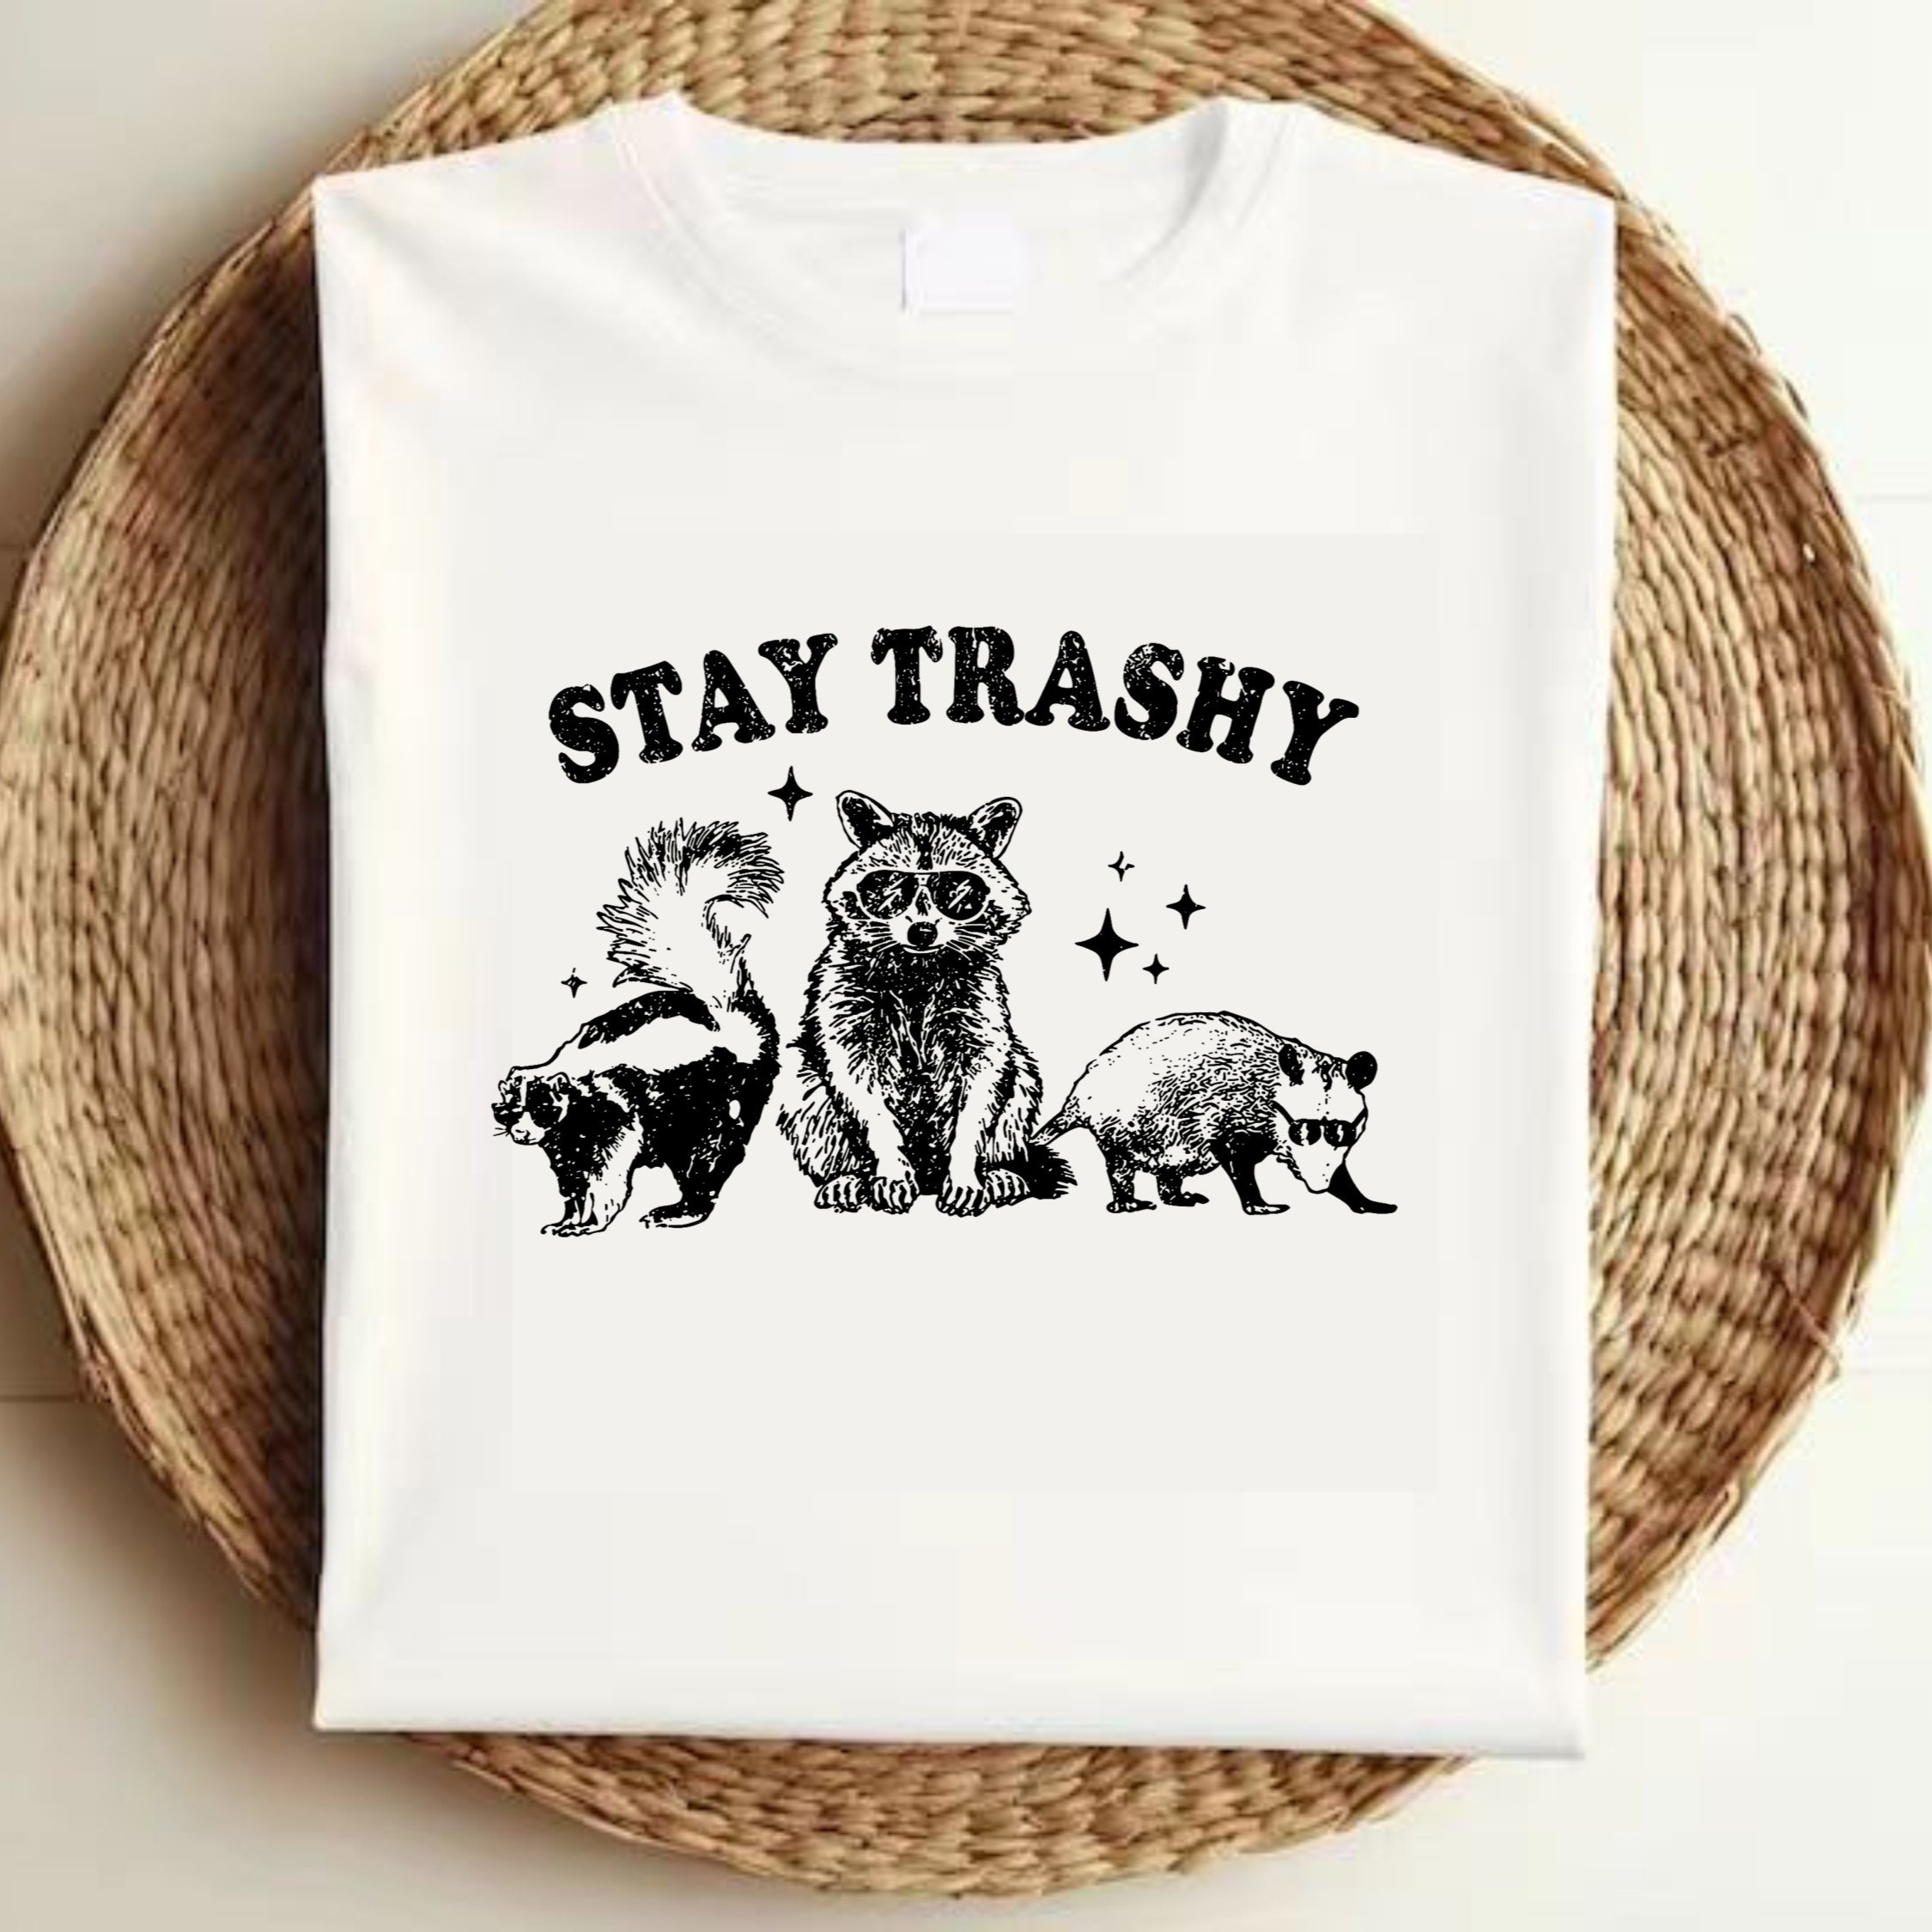 

Stay " Funny Raccoon Heat Transfer Sticker - Diy Iron-on Decal For T-shirts, Hoodies, Bags & Pillows - Black Pvc Animal Lover Applique